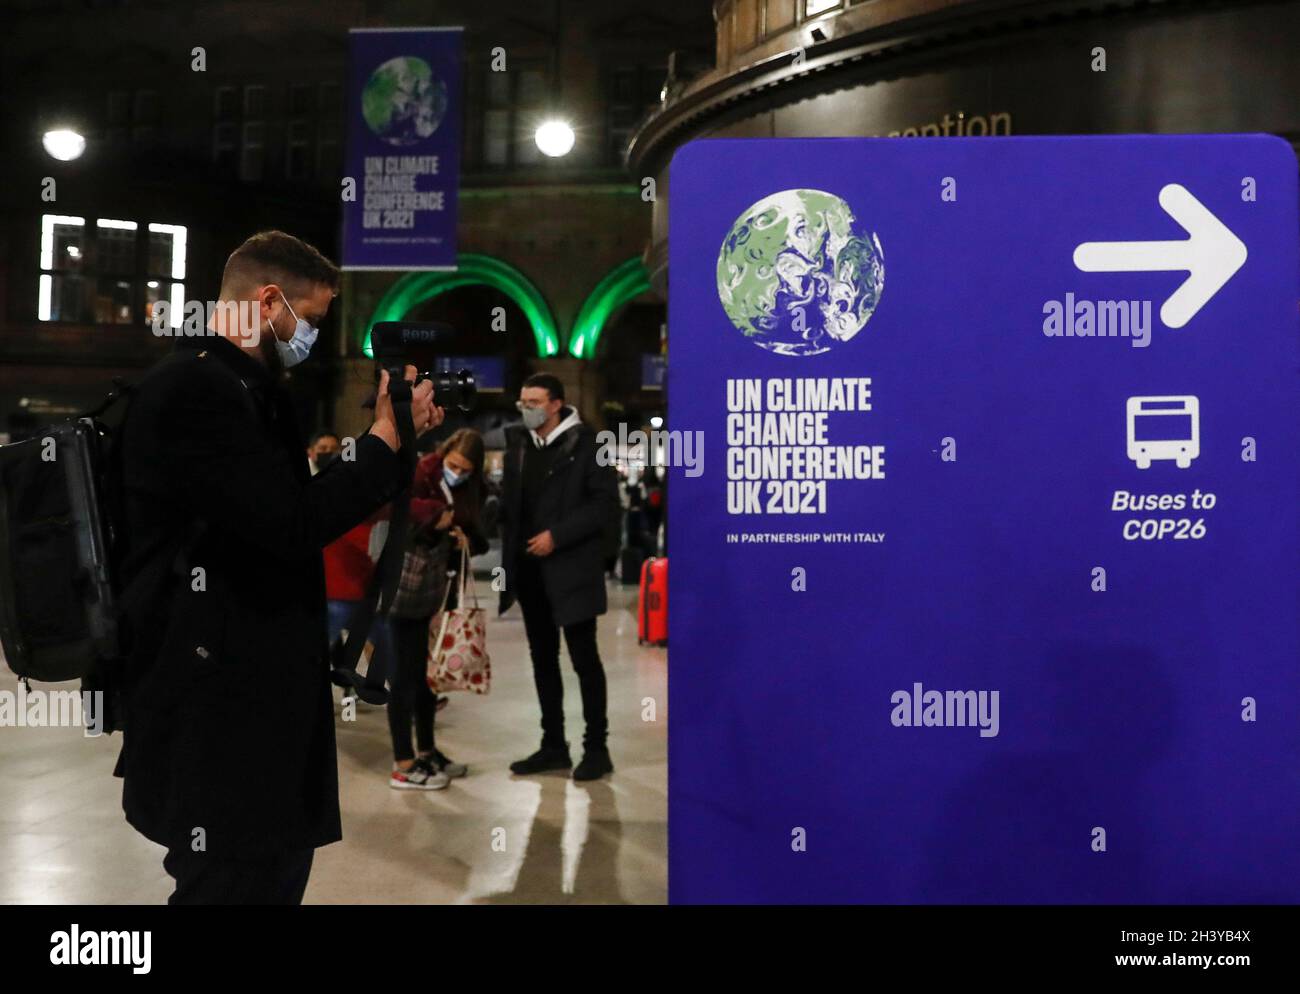 Glasgow, UK. 30th Oct, 2021. A man films at Glasgow Central train station in Glasgow, Scotland, the United Kingdom on Oct. 30, 2021. The 26th United Nations Climate Change Conference of the Parties (COP26) is scheduled from Oct. 31 to Nov. 12 in Glasgow, Scotland. This is the first of its kind since the Paris Agreement came into force. Credit: Han Yan/Xinhua/Alamy Live News Stock Photo